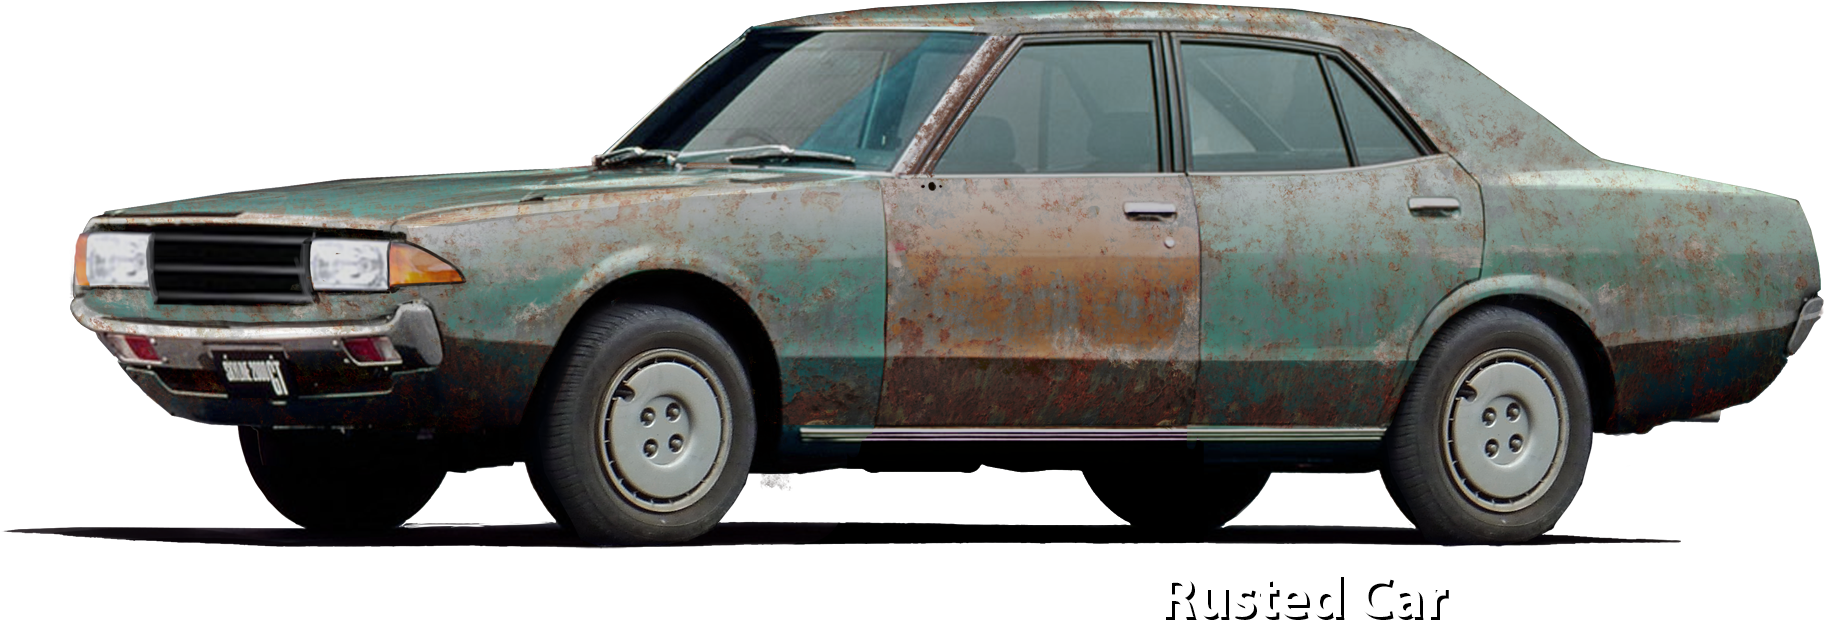 Rusted Car Concept